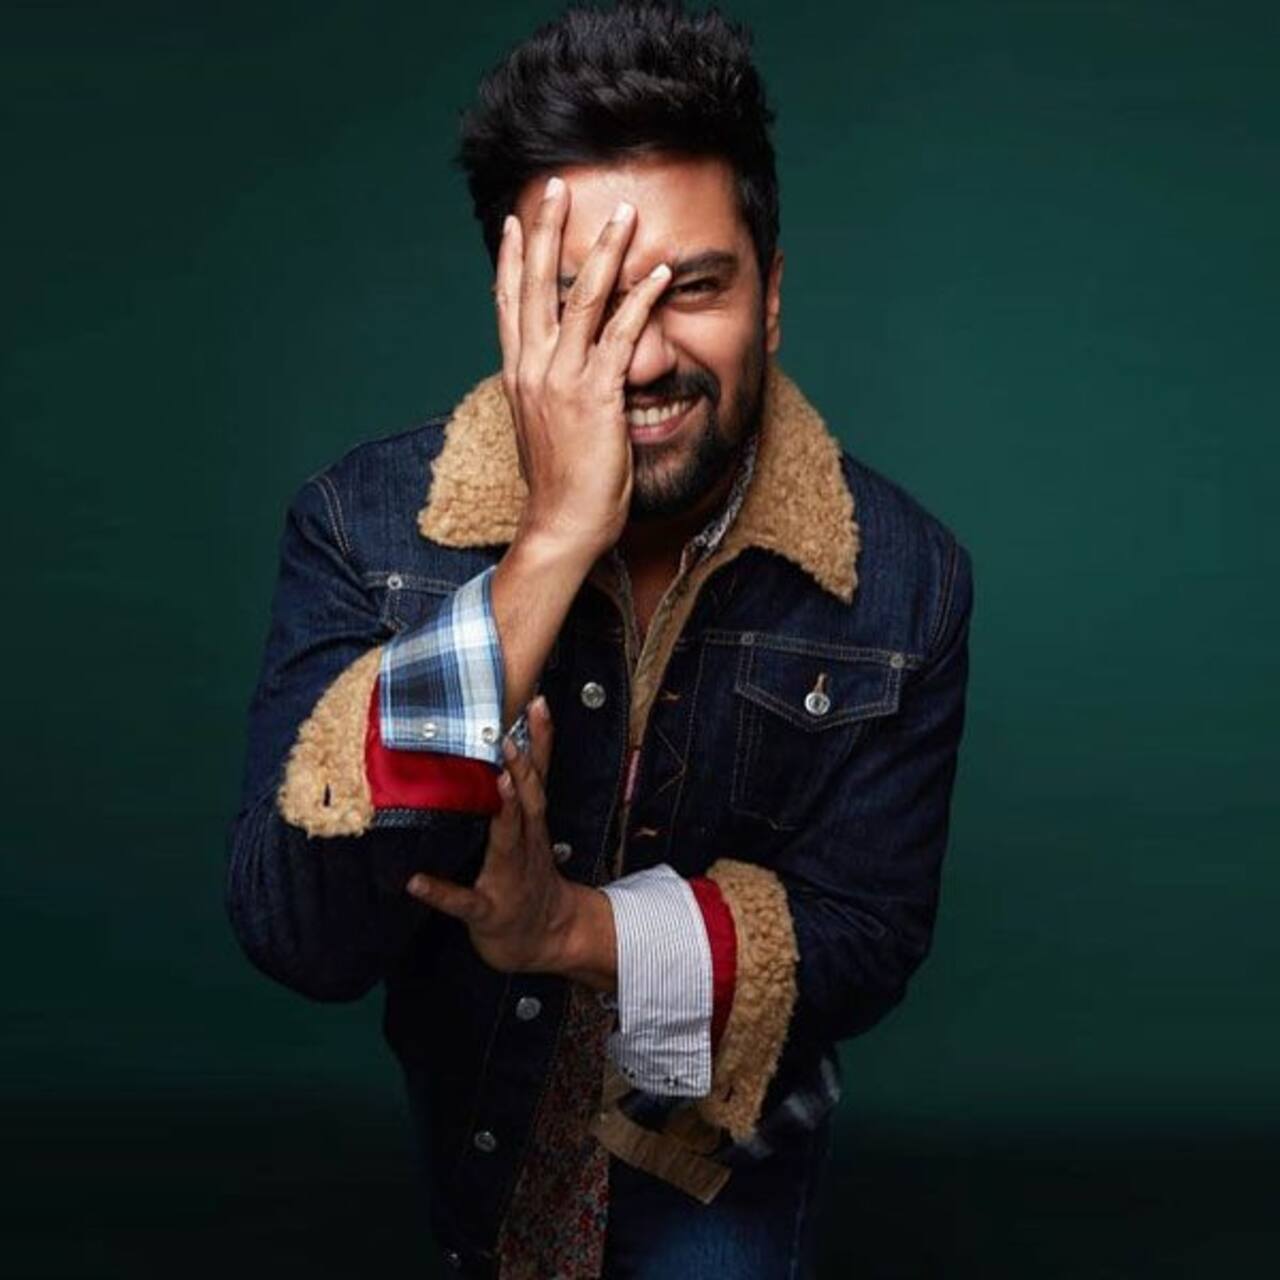 2018- The Vicky Kaushal year